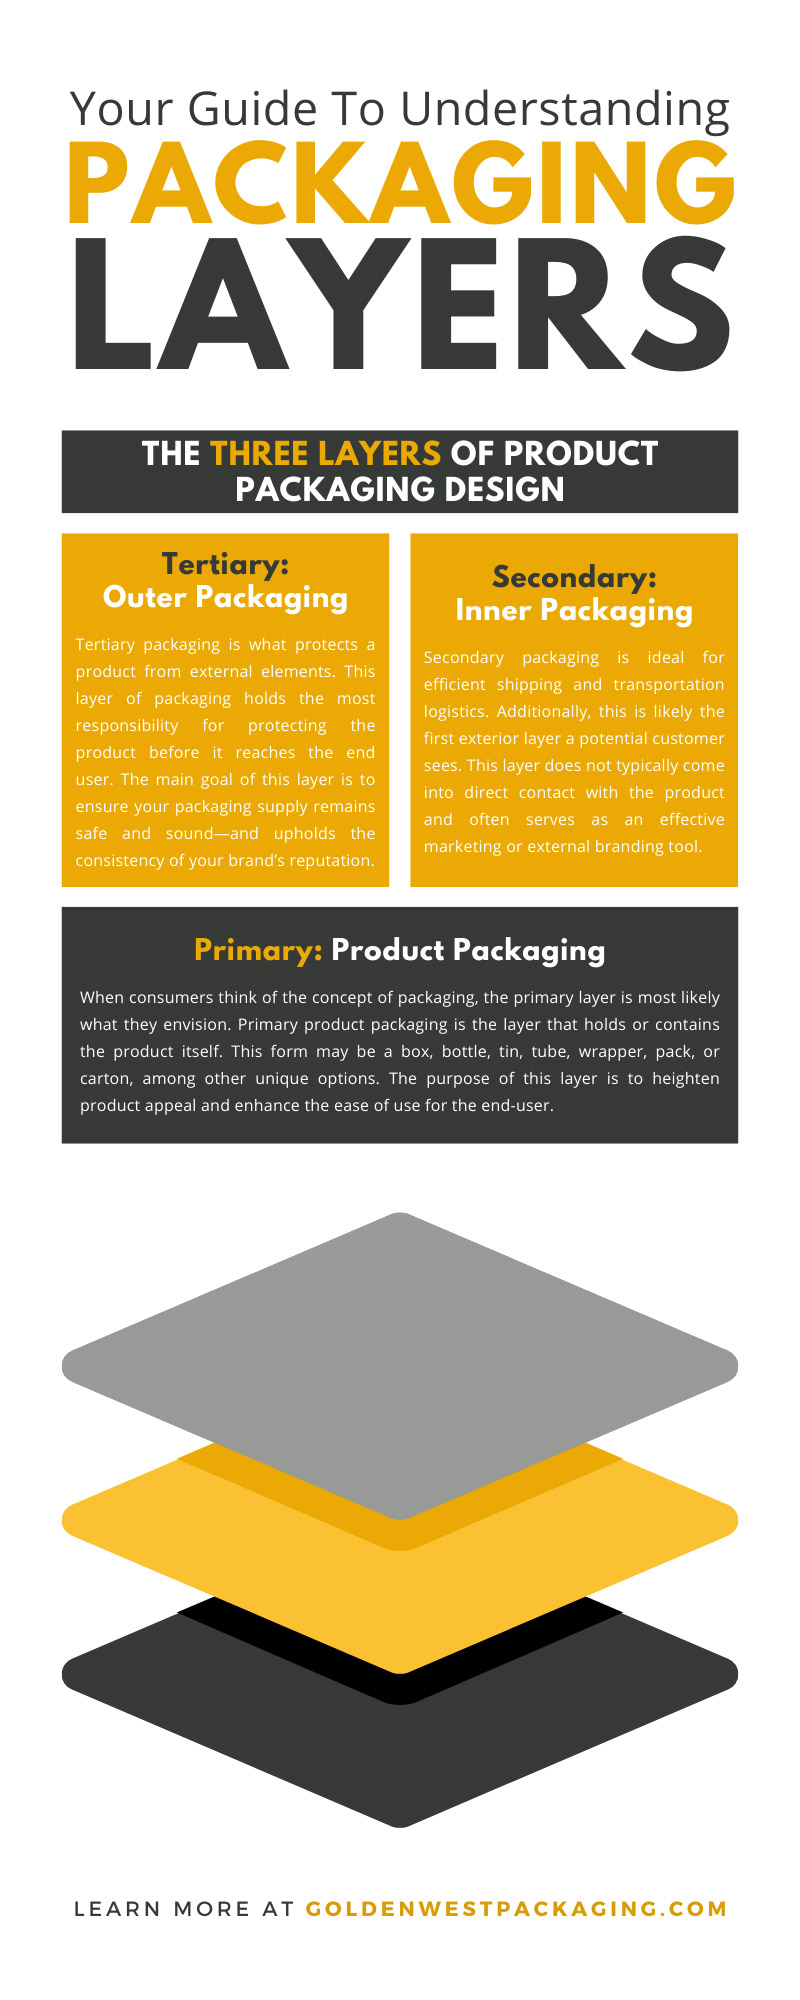 Your Guide To Understanding Packaging Layers